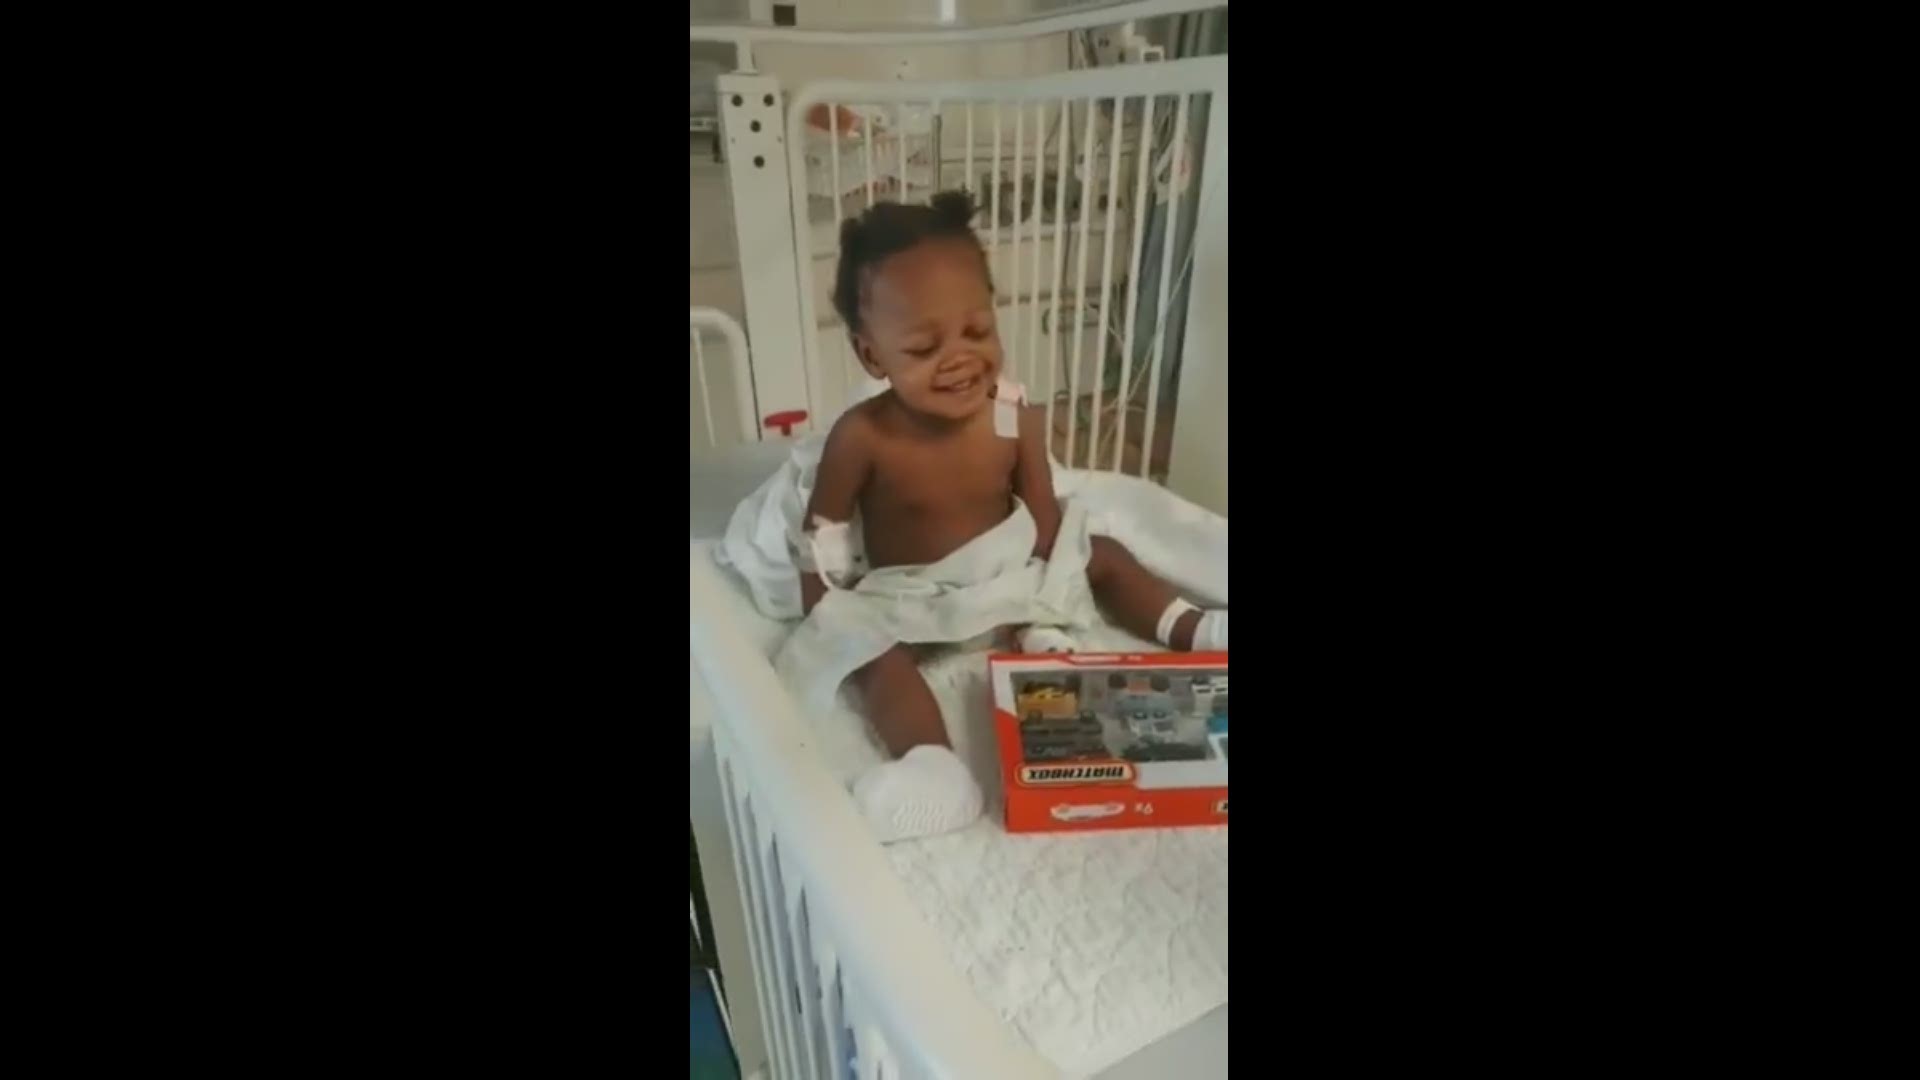 The grandfather of the boy shared a video of him recovering in the hospital